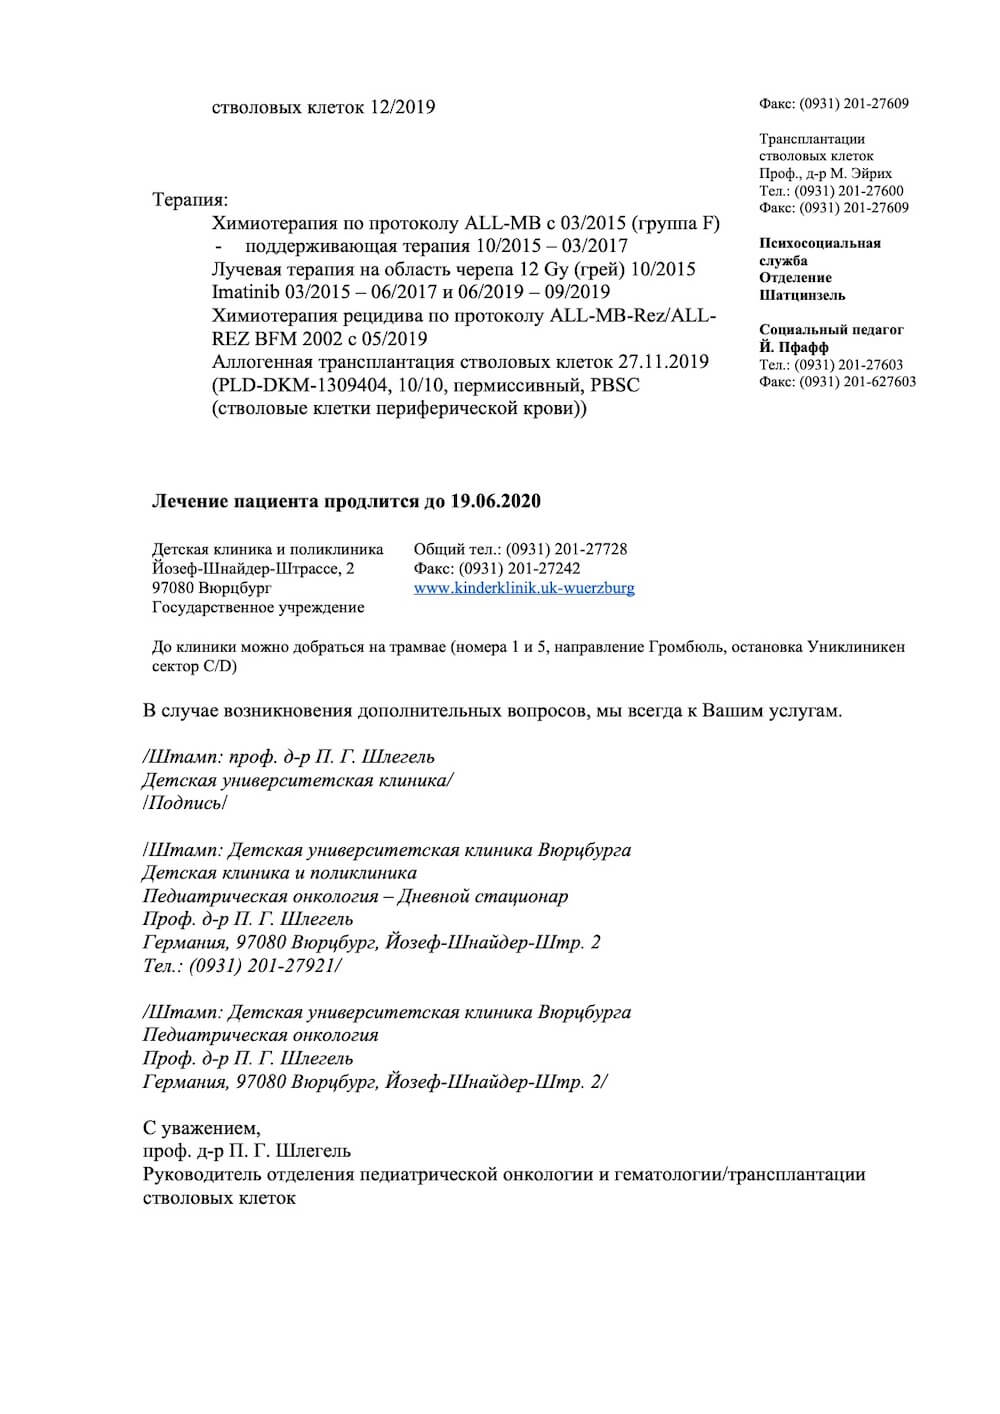 A medical certificate translated from German into Russian (page 2)